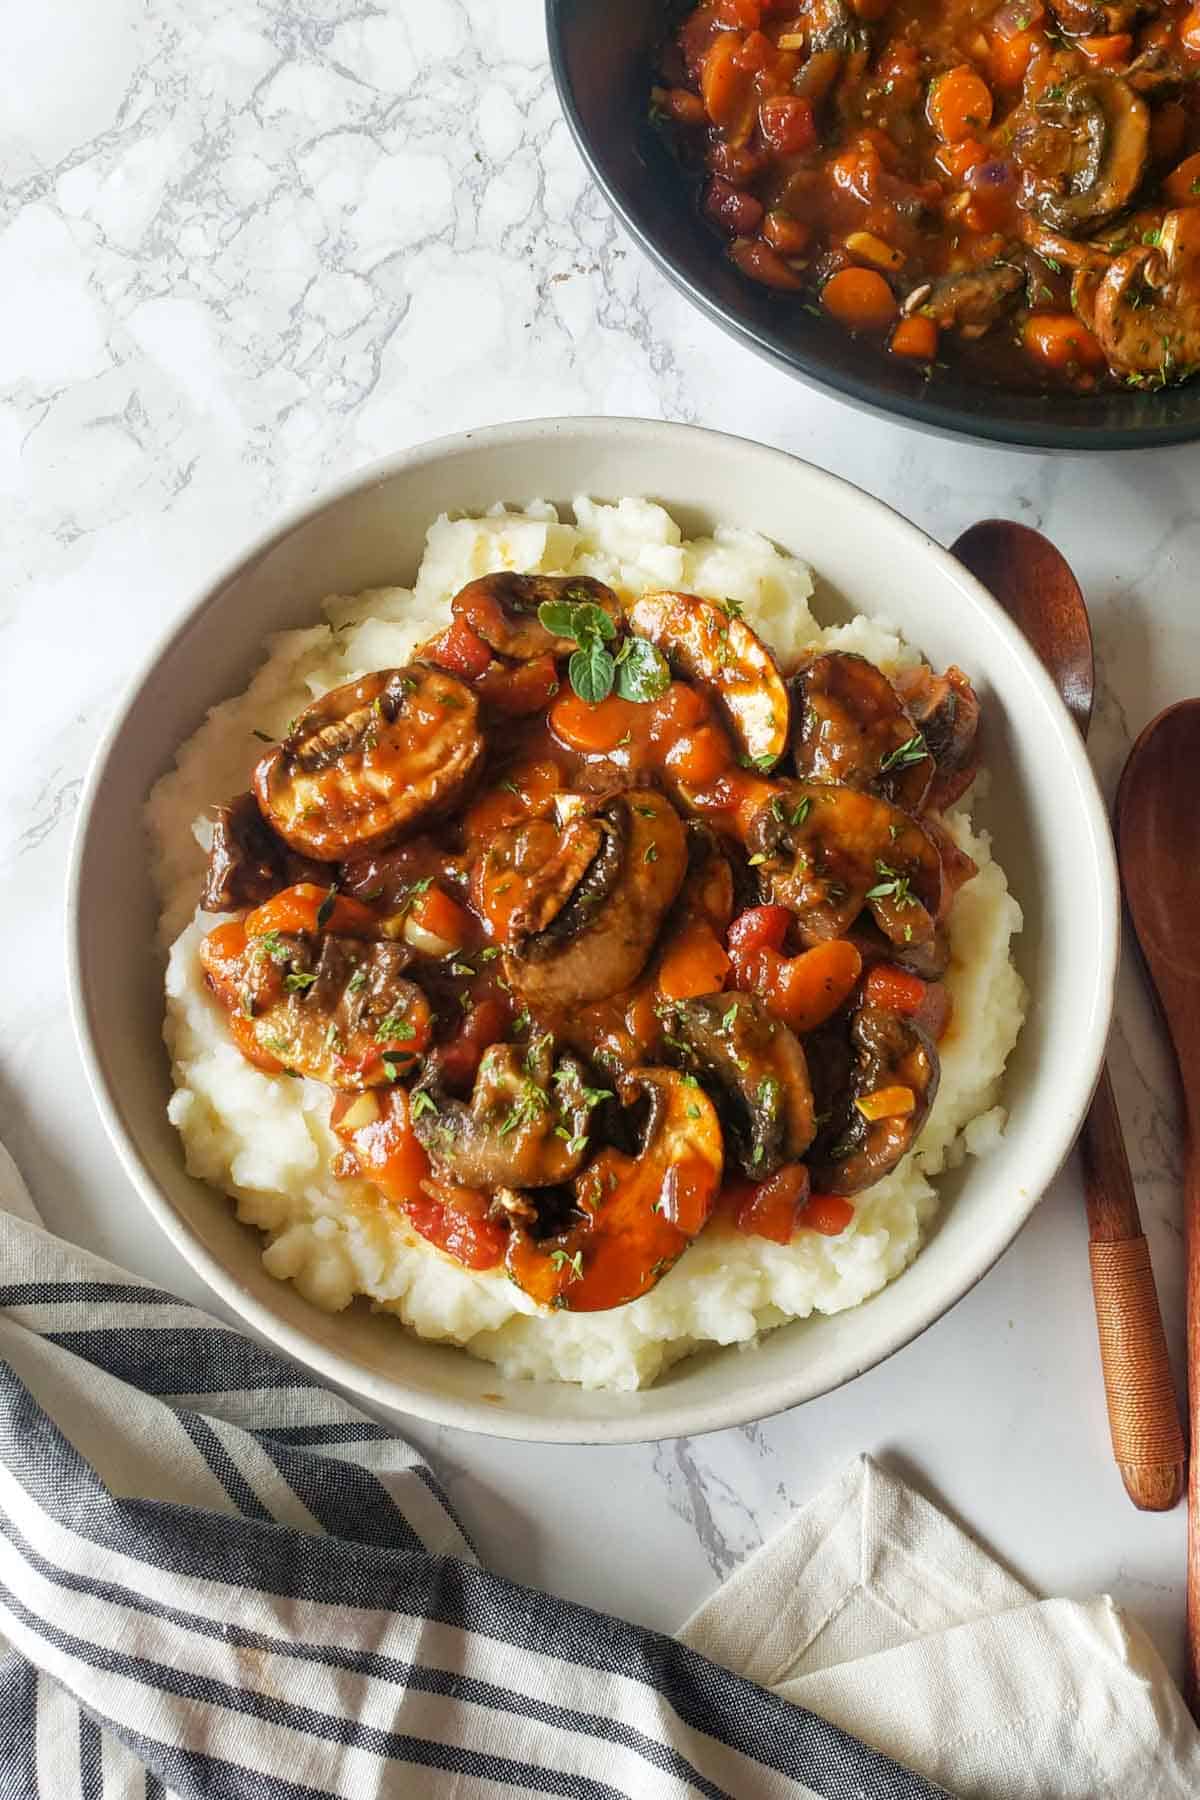 Rich and savory Mushroom stew with vegetables served over mashed potatoes.